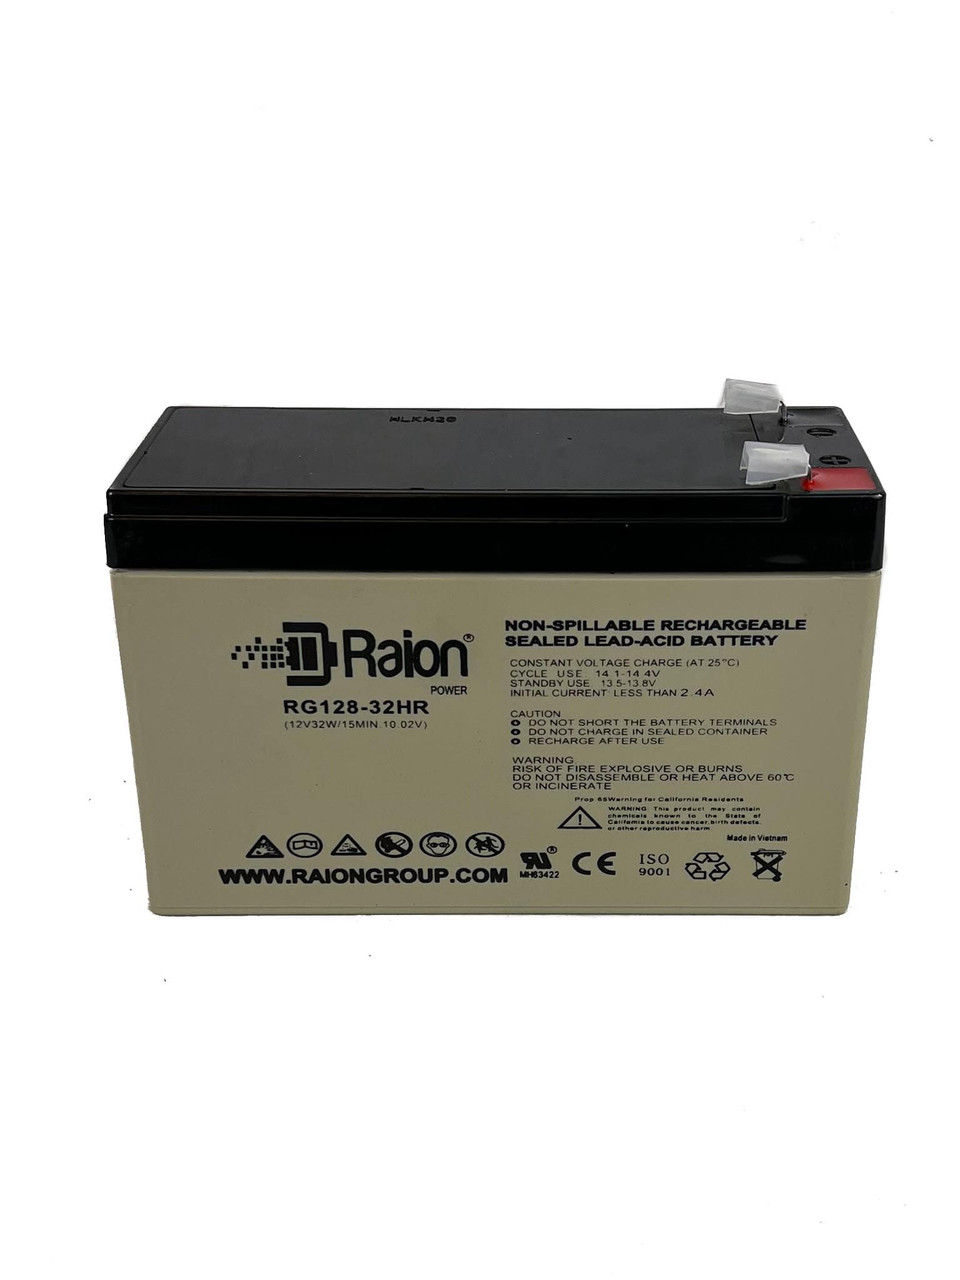 Raion Power RG128-32HR Replacement High Rate Battery Cartridge for Tripp Lite Smart RBC51